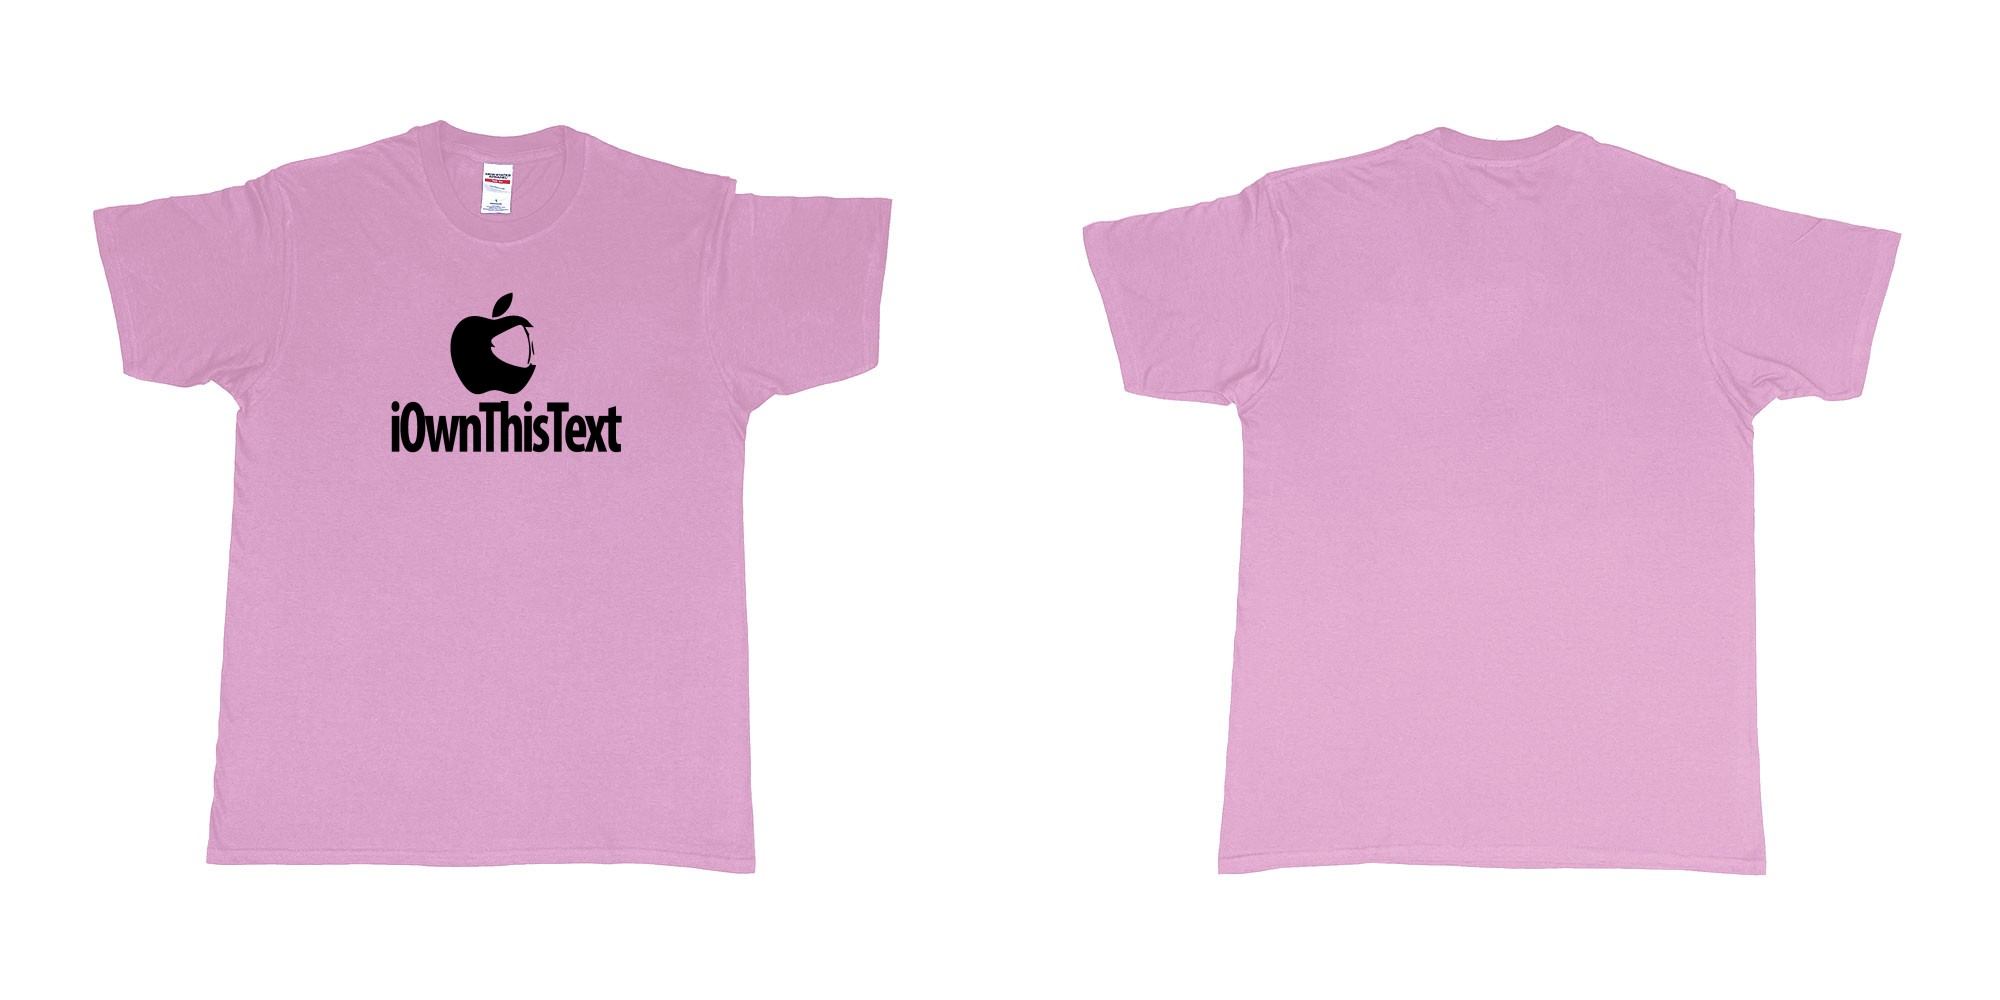 Custom tshirt design Iwanker in fabric color light-pink choice your own text made in Bali by The Pirate Way